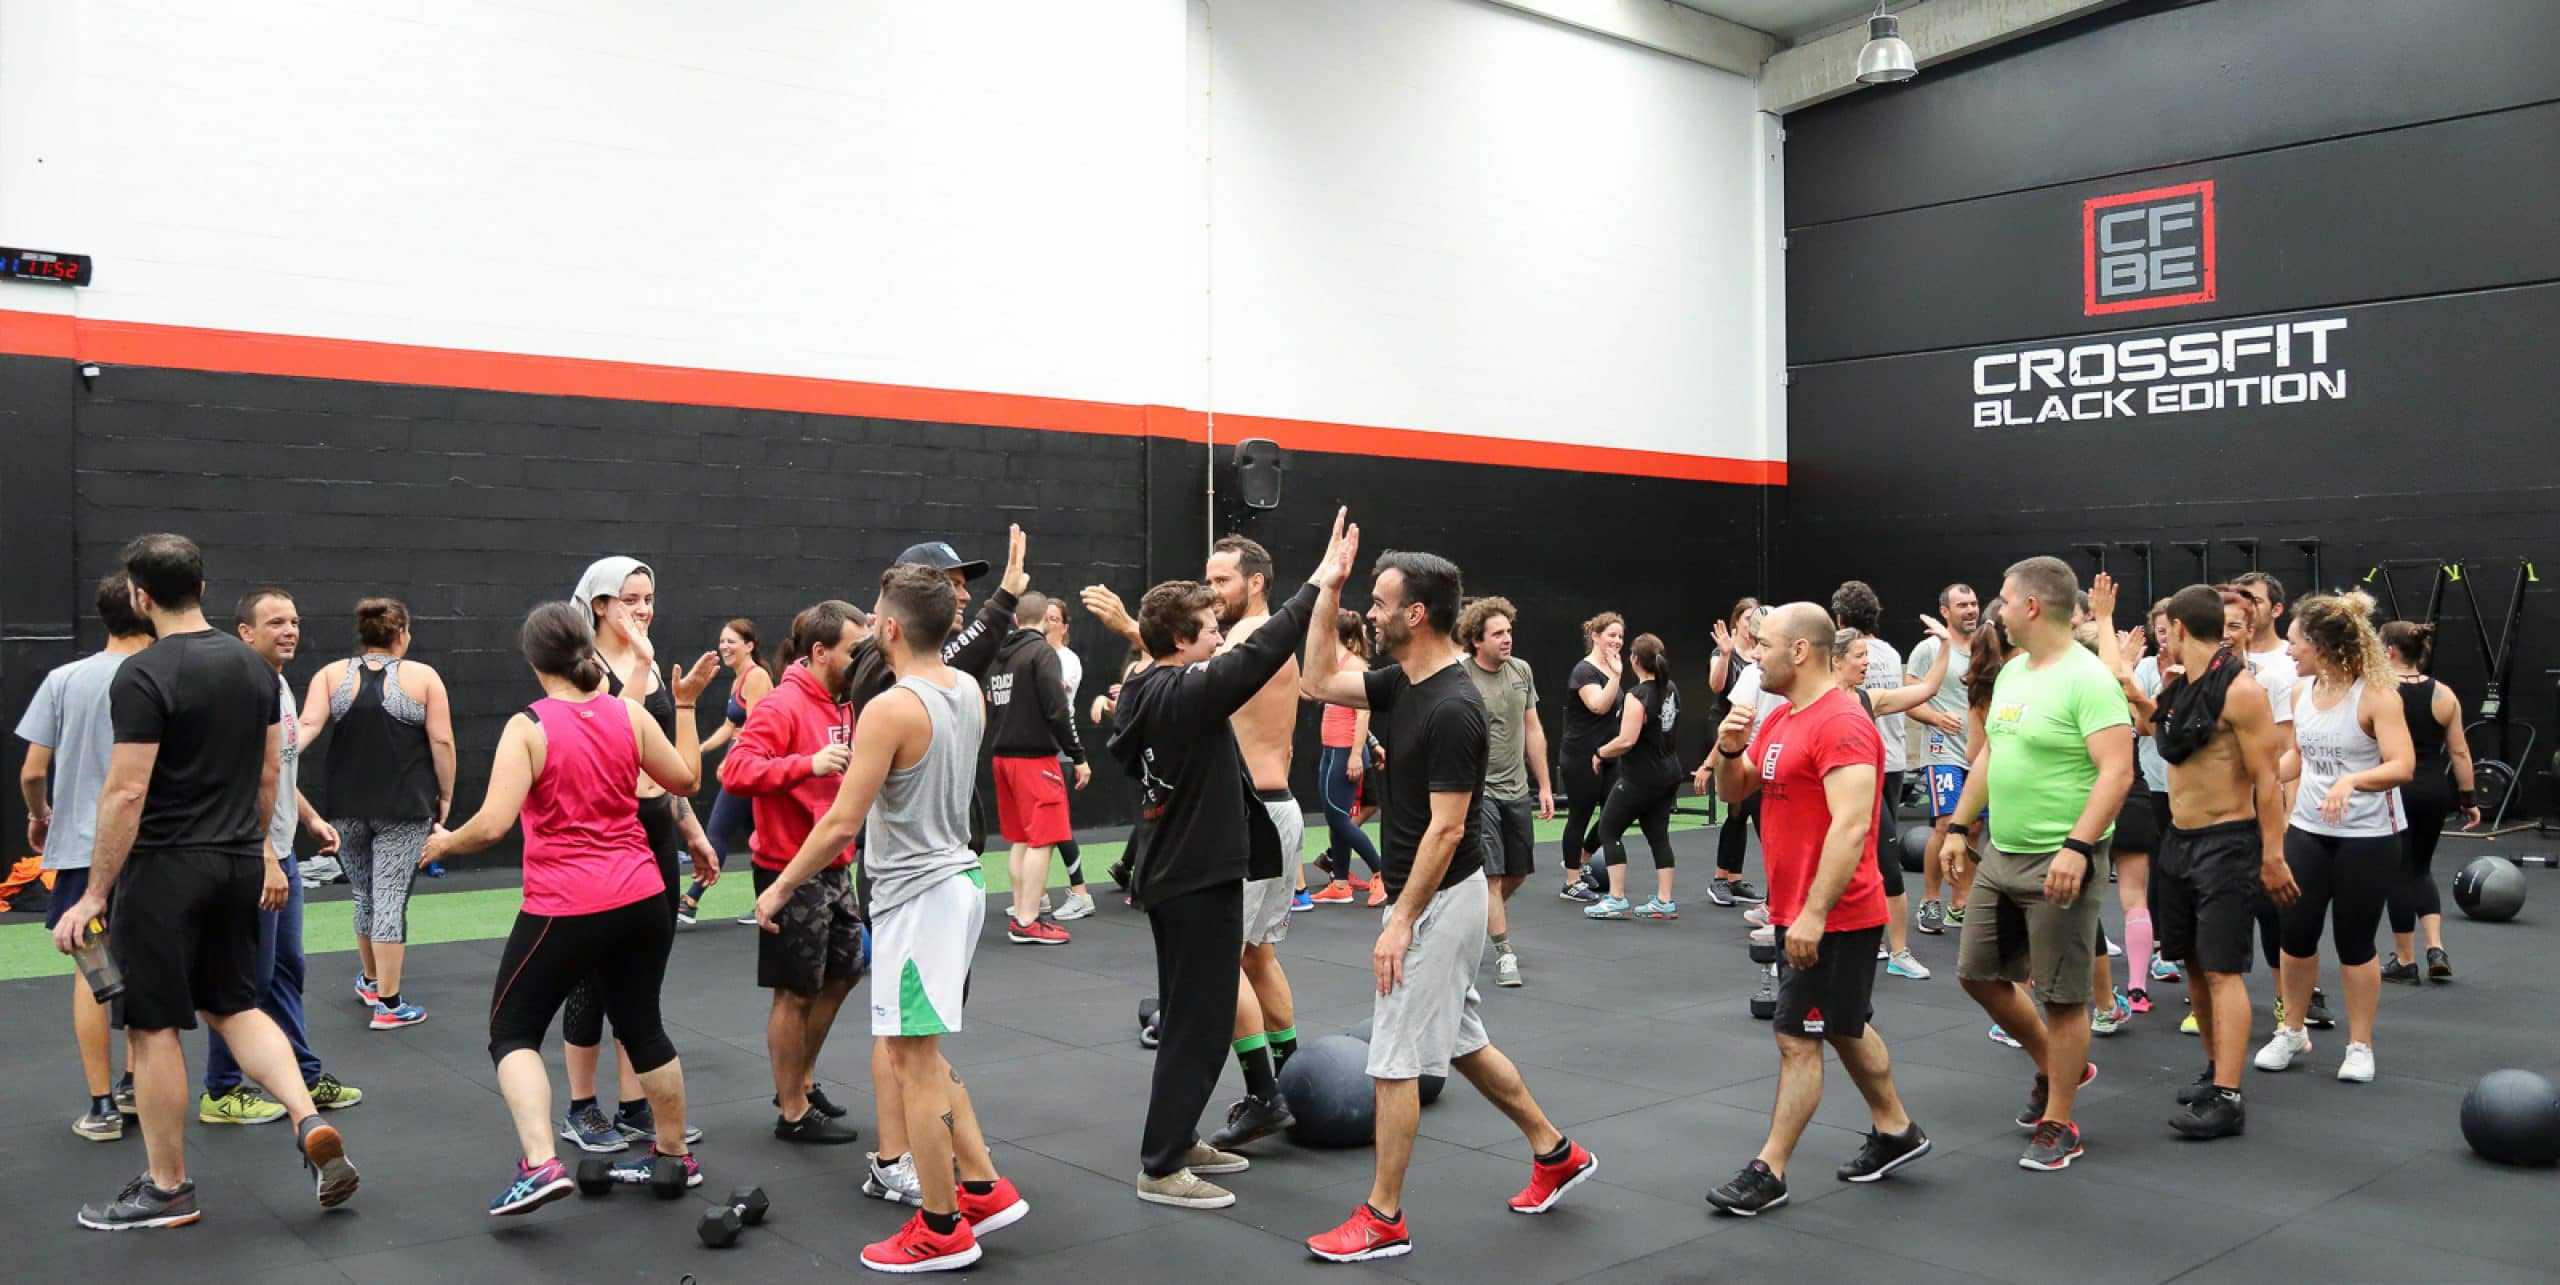 Members in a class at CrossFit Black Edition